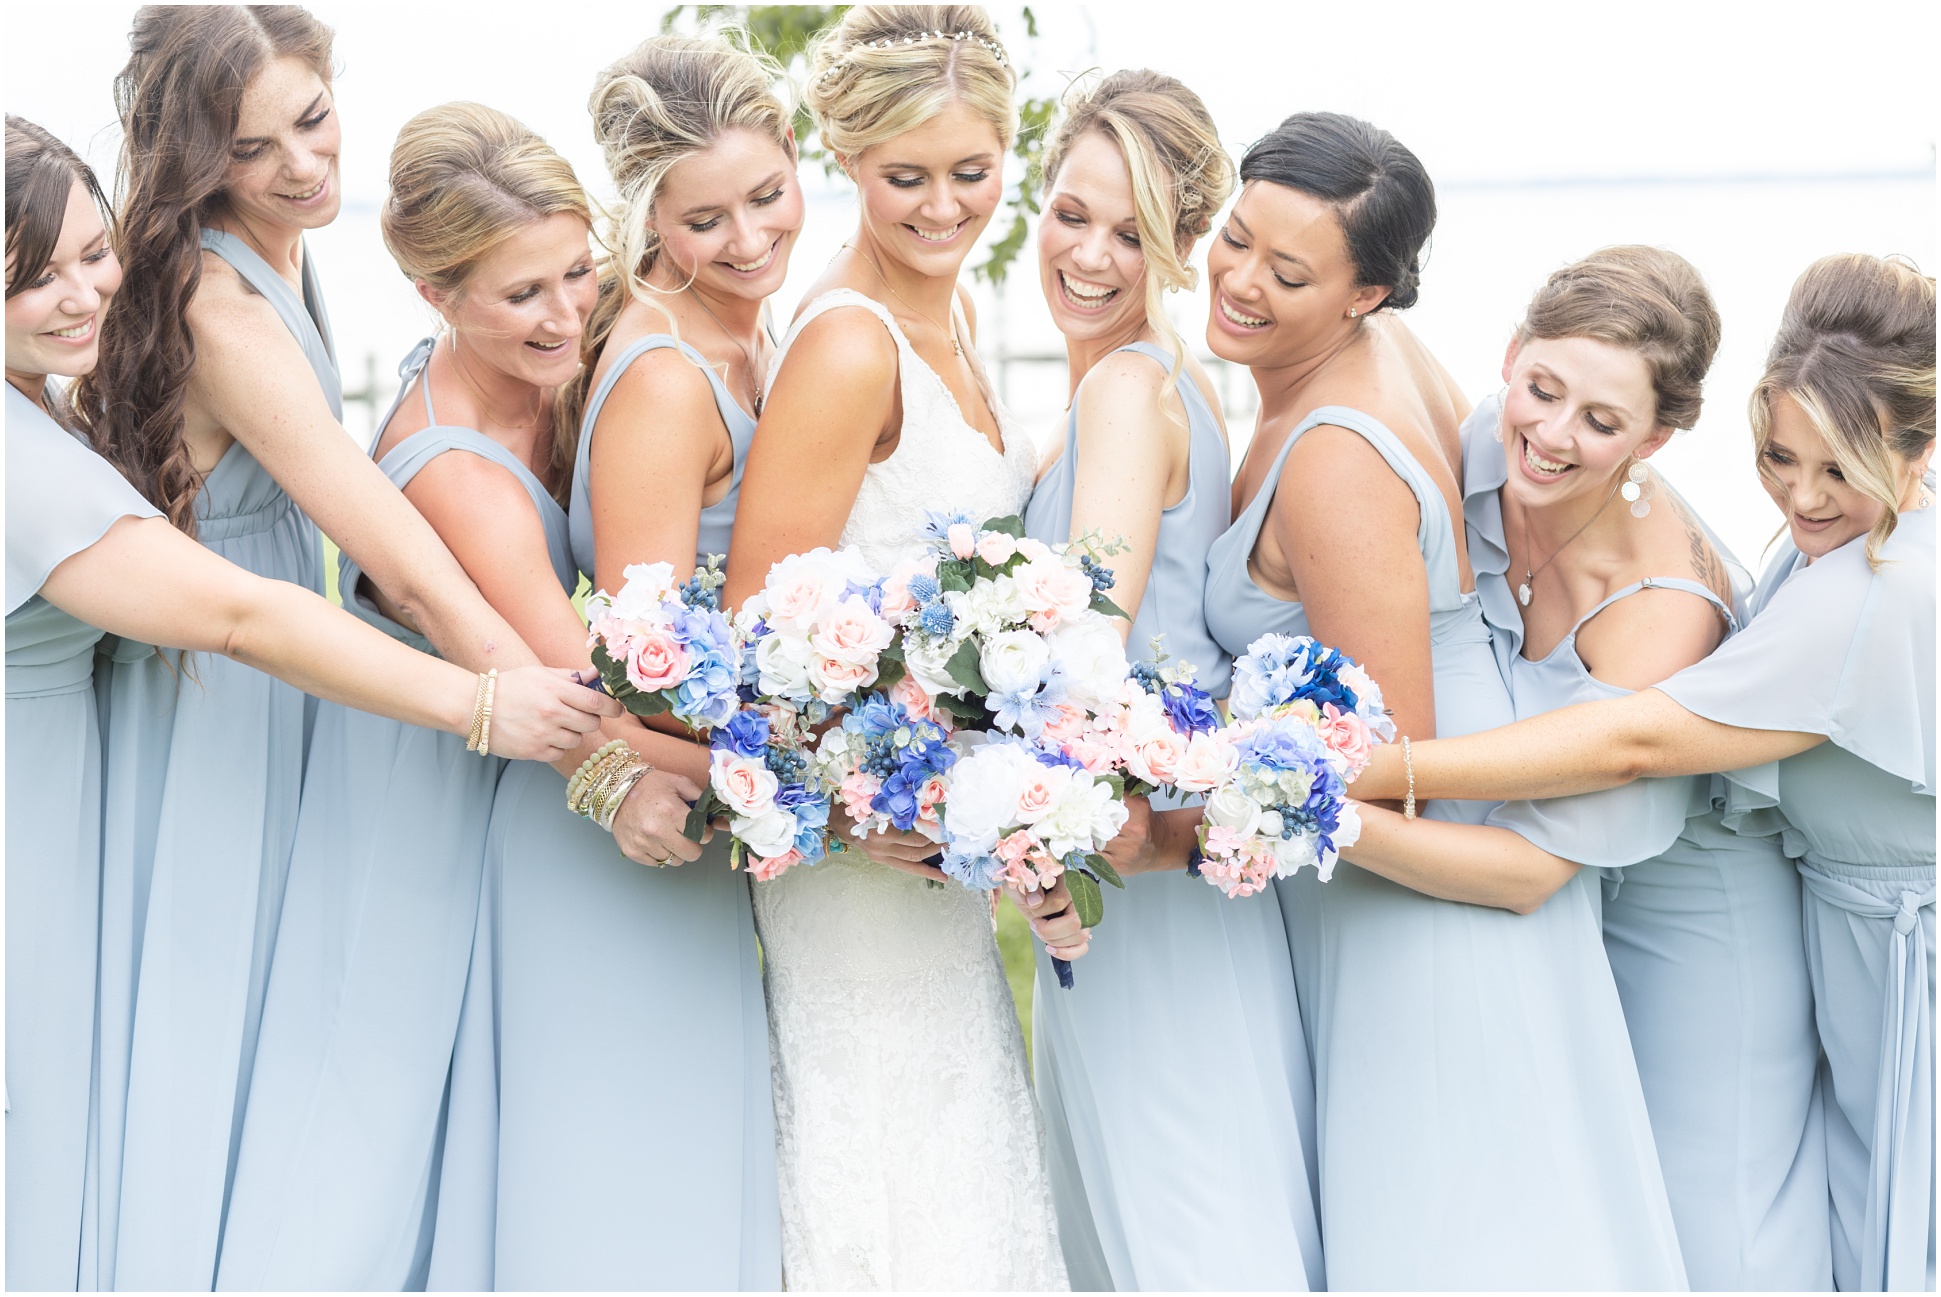 Bridesmaids standing around the bride with their beautiful handmade bouquets